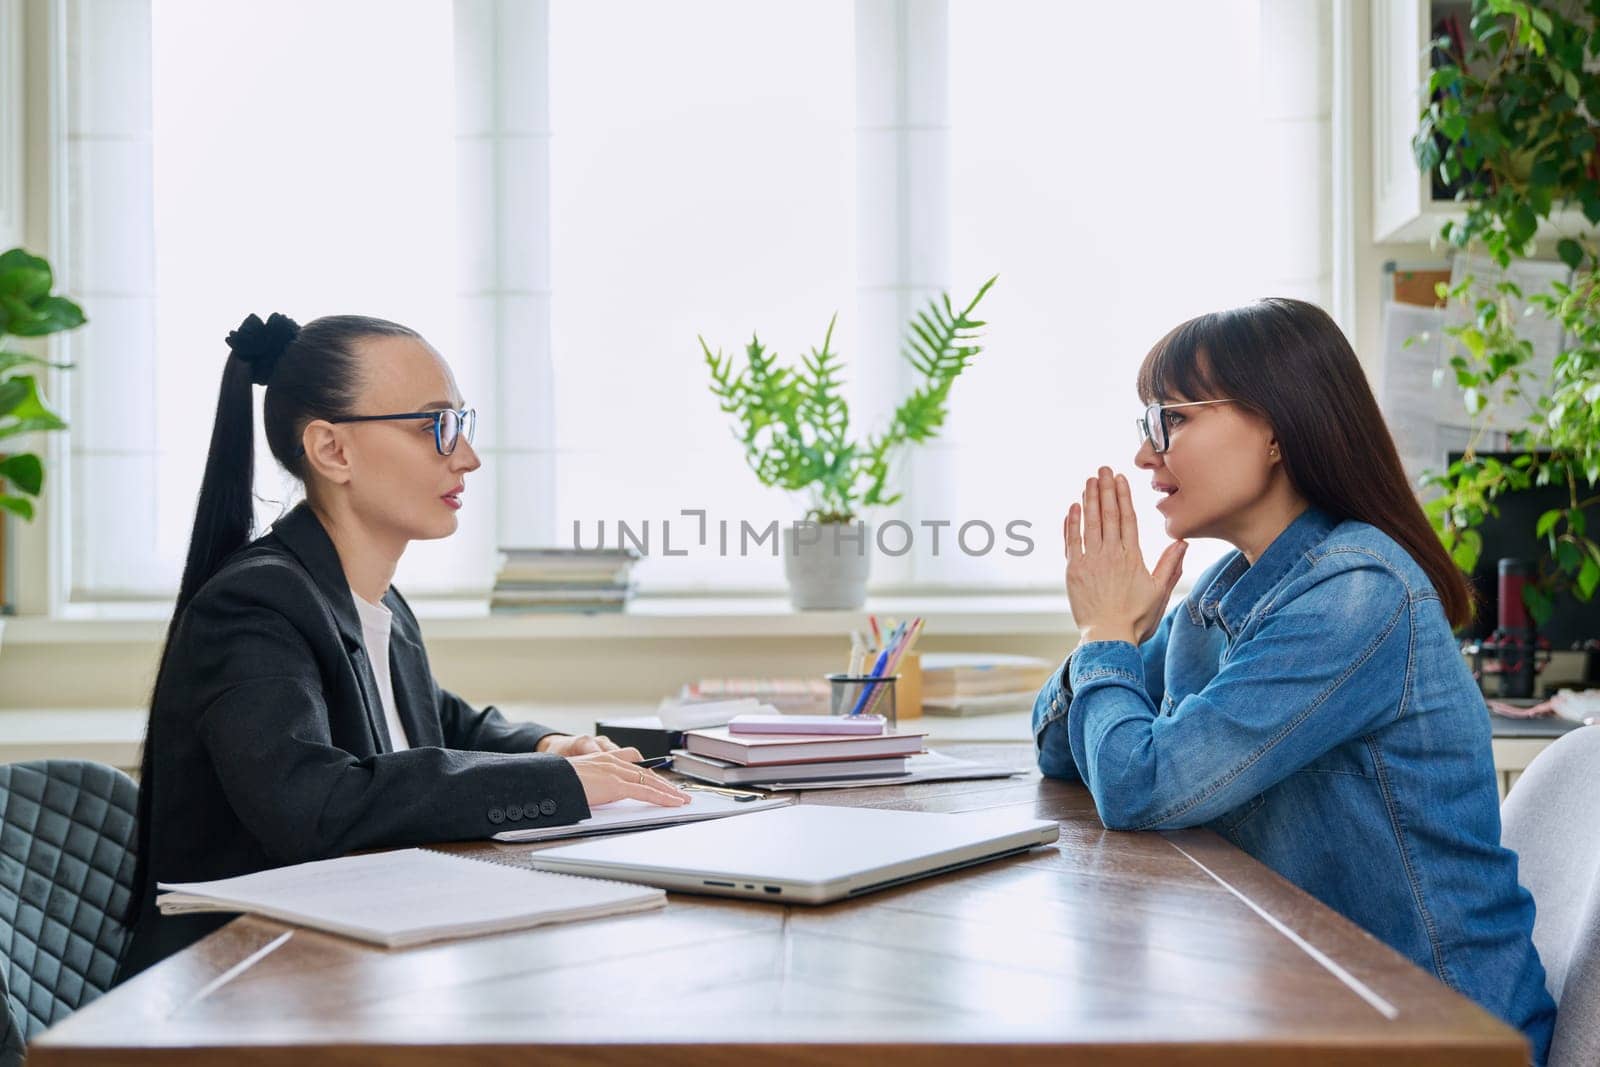 Mental therapy session of mature female with professional psychologist counselor. Talking serious women sitting at table, psychology, psychotherapy, counseling, social service, support help treatment